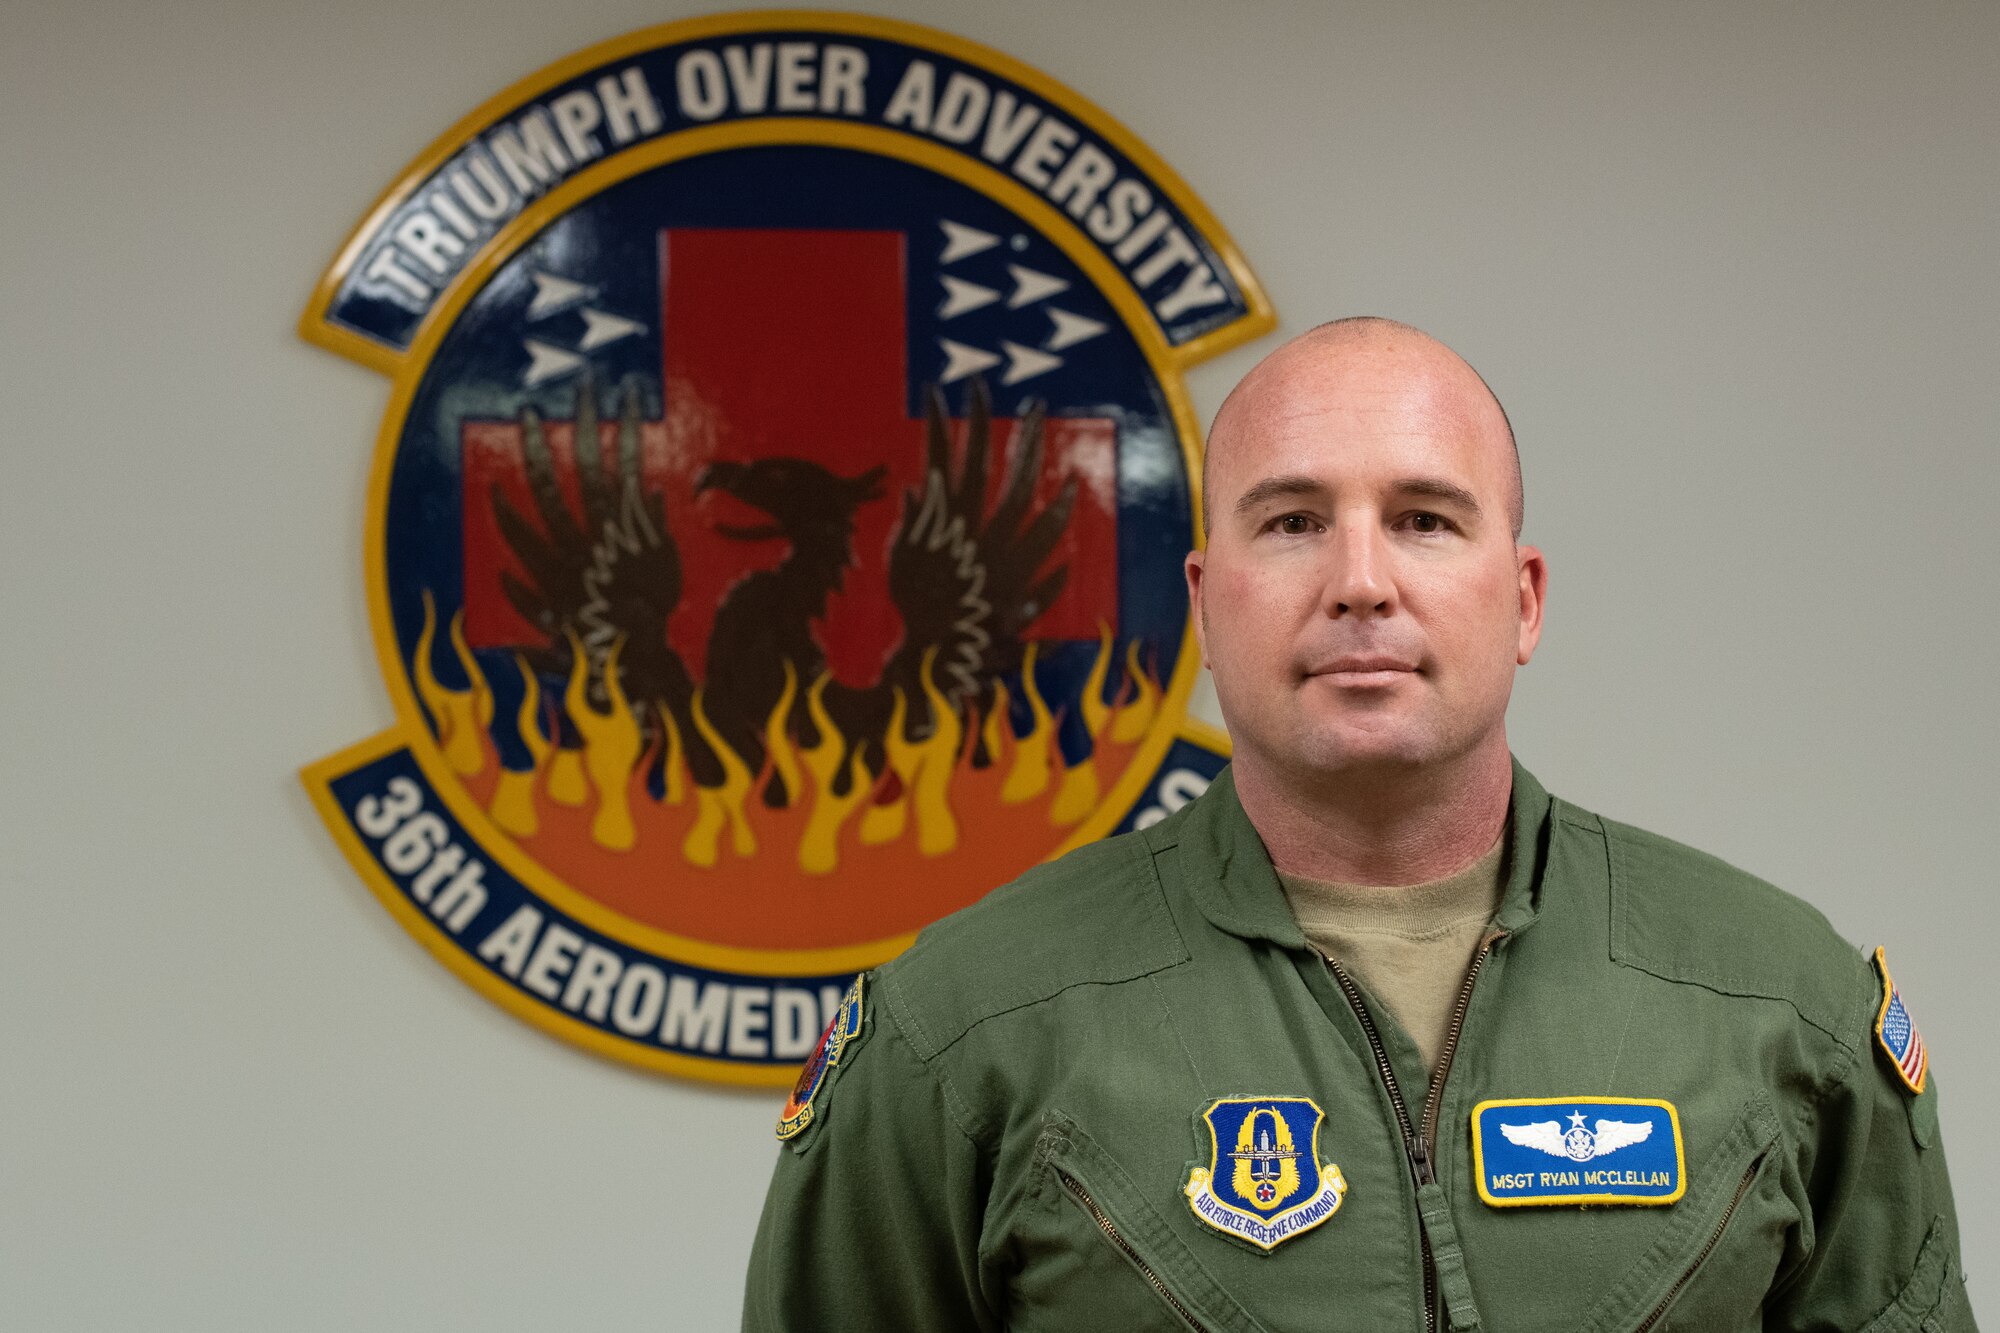 MSgt. McClellan stands in front of the 36th Aeromedical Evacuation Squadron logo. It says Triumph over adversity/36th AES.